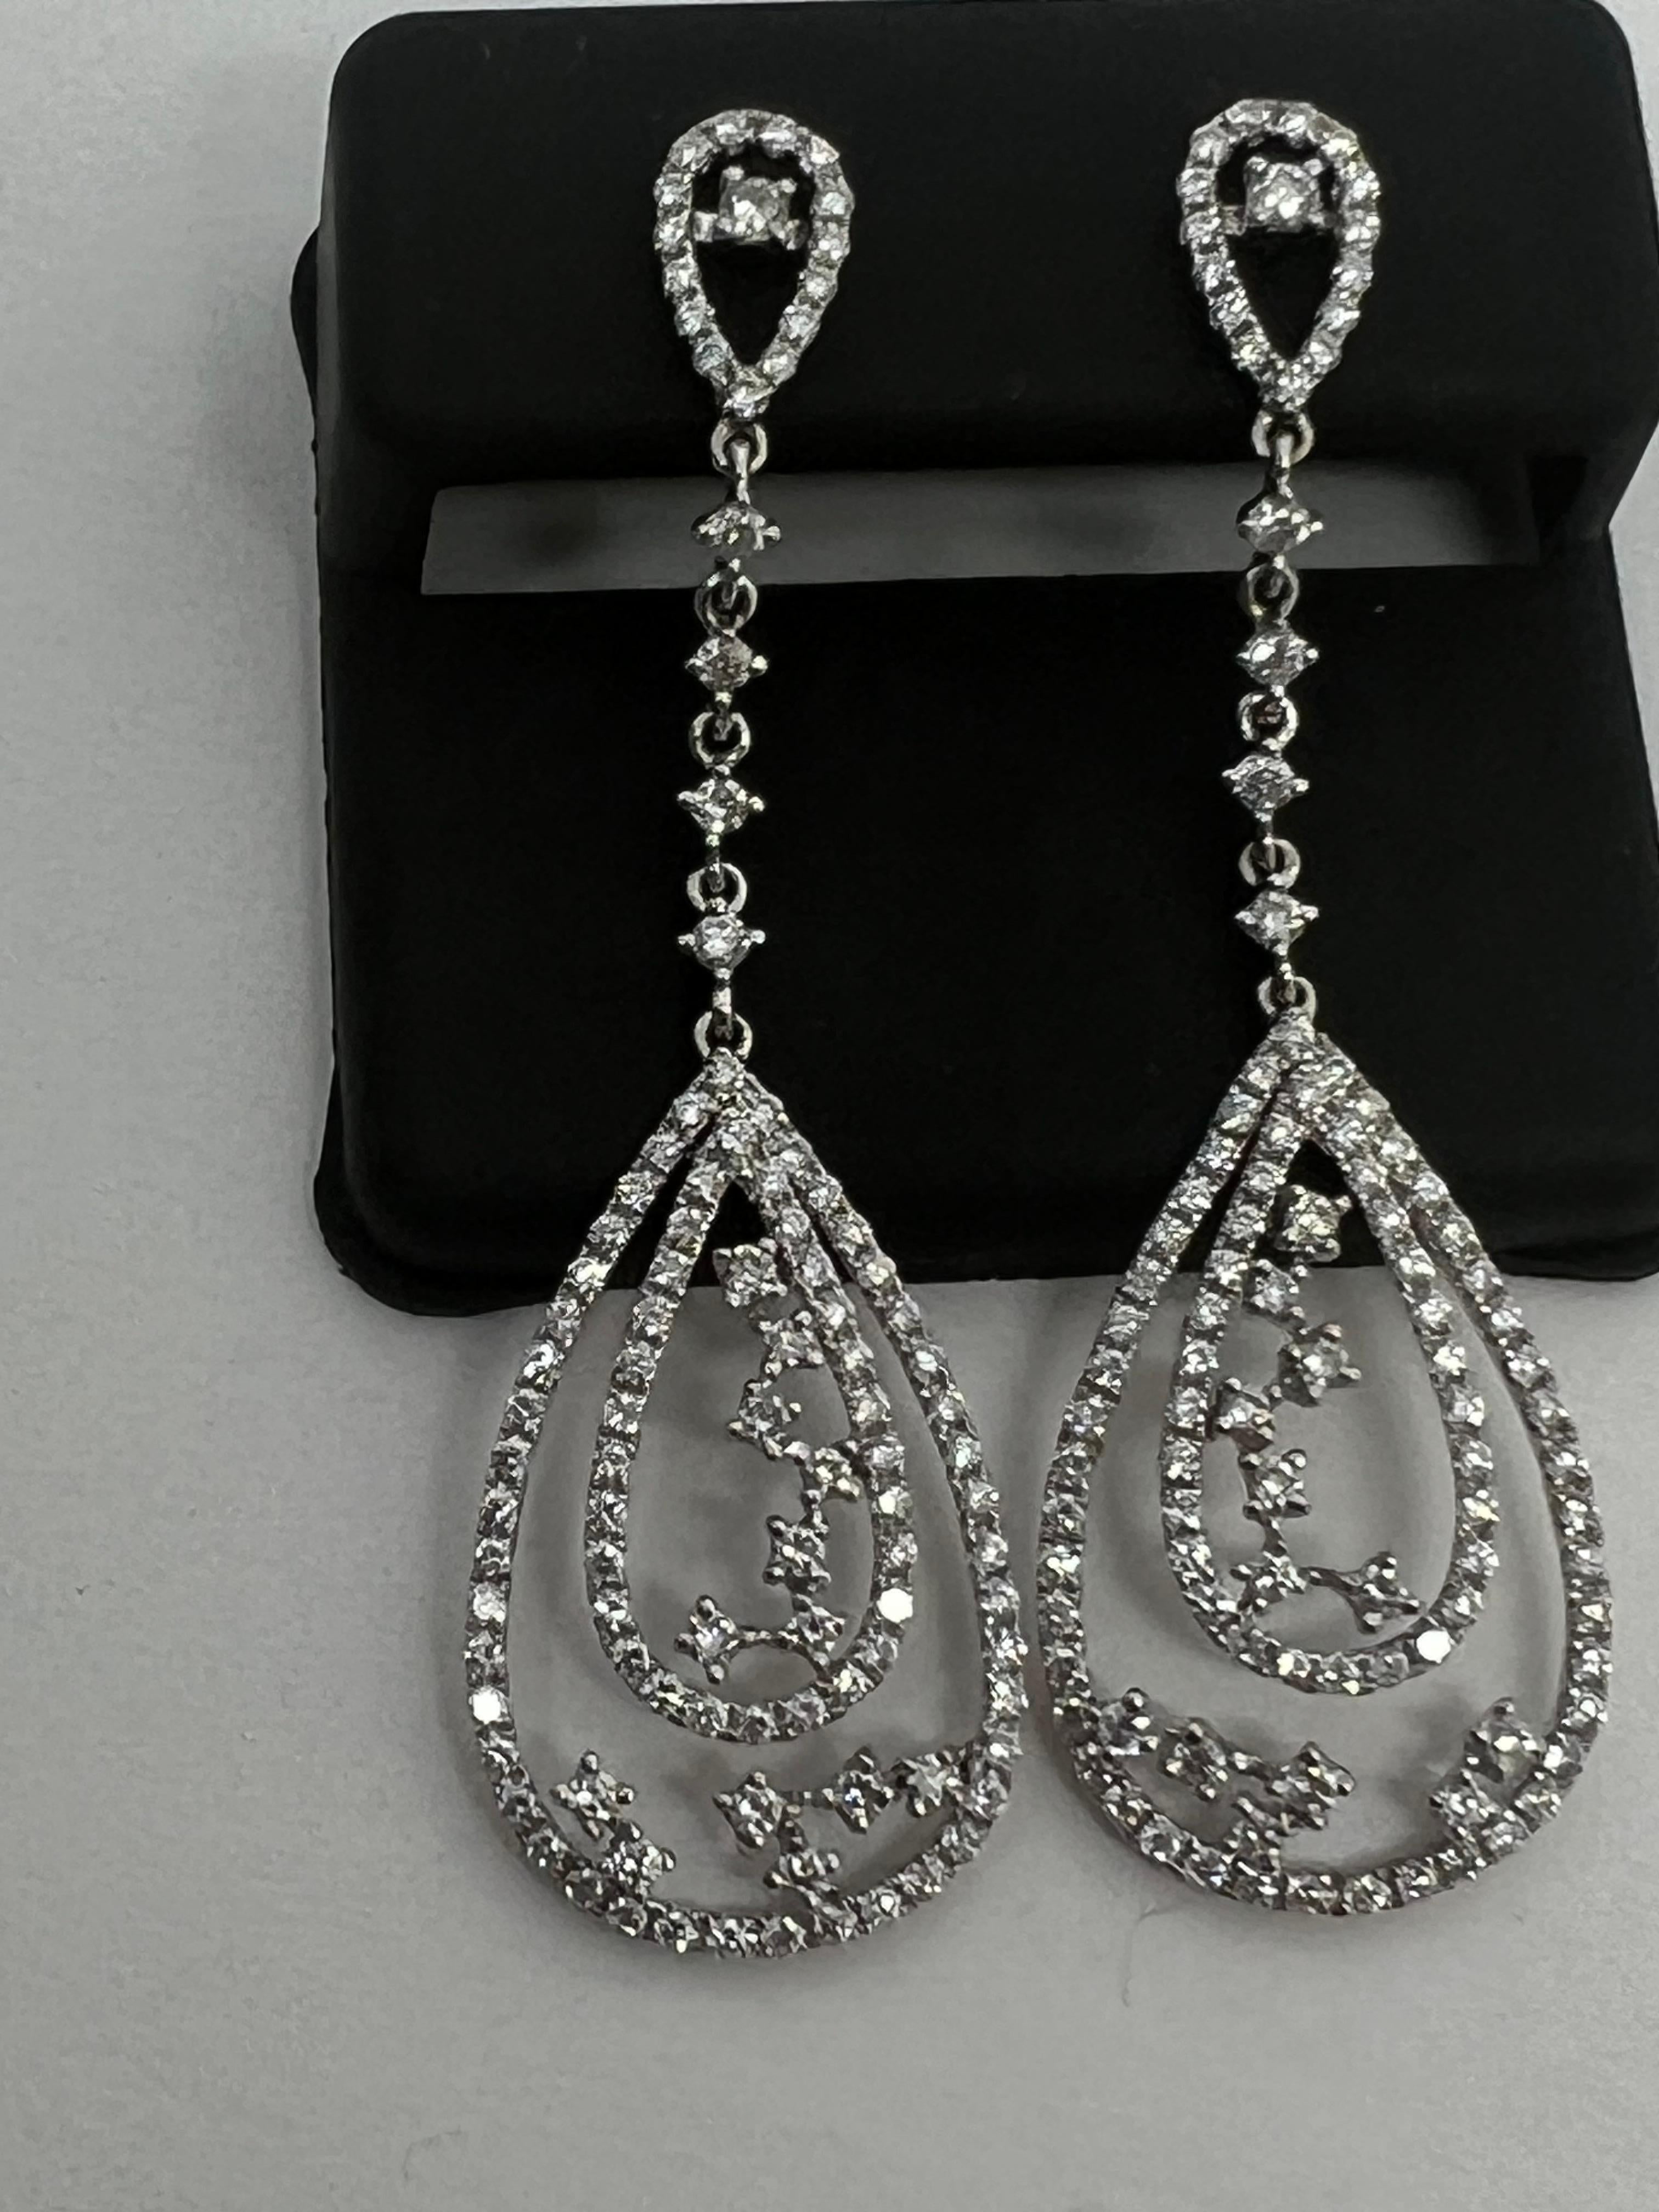 
Elevate your jewelry collection with these stunning 14k white gold diamond dangle tear drop earrings. The exquisite craftsmanship is evident in the delicate design and attention to detail. The dazzling diamonds add a touch of glamour to any outfit,